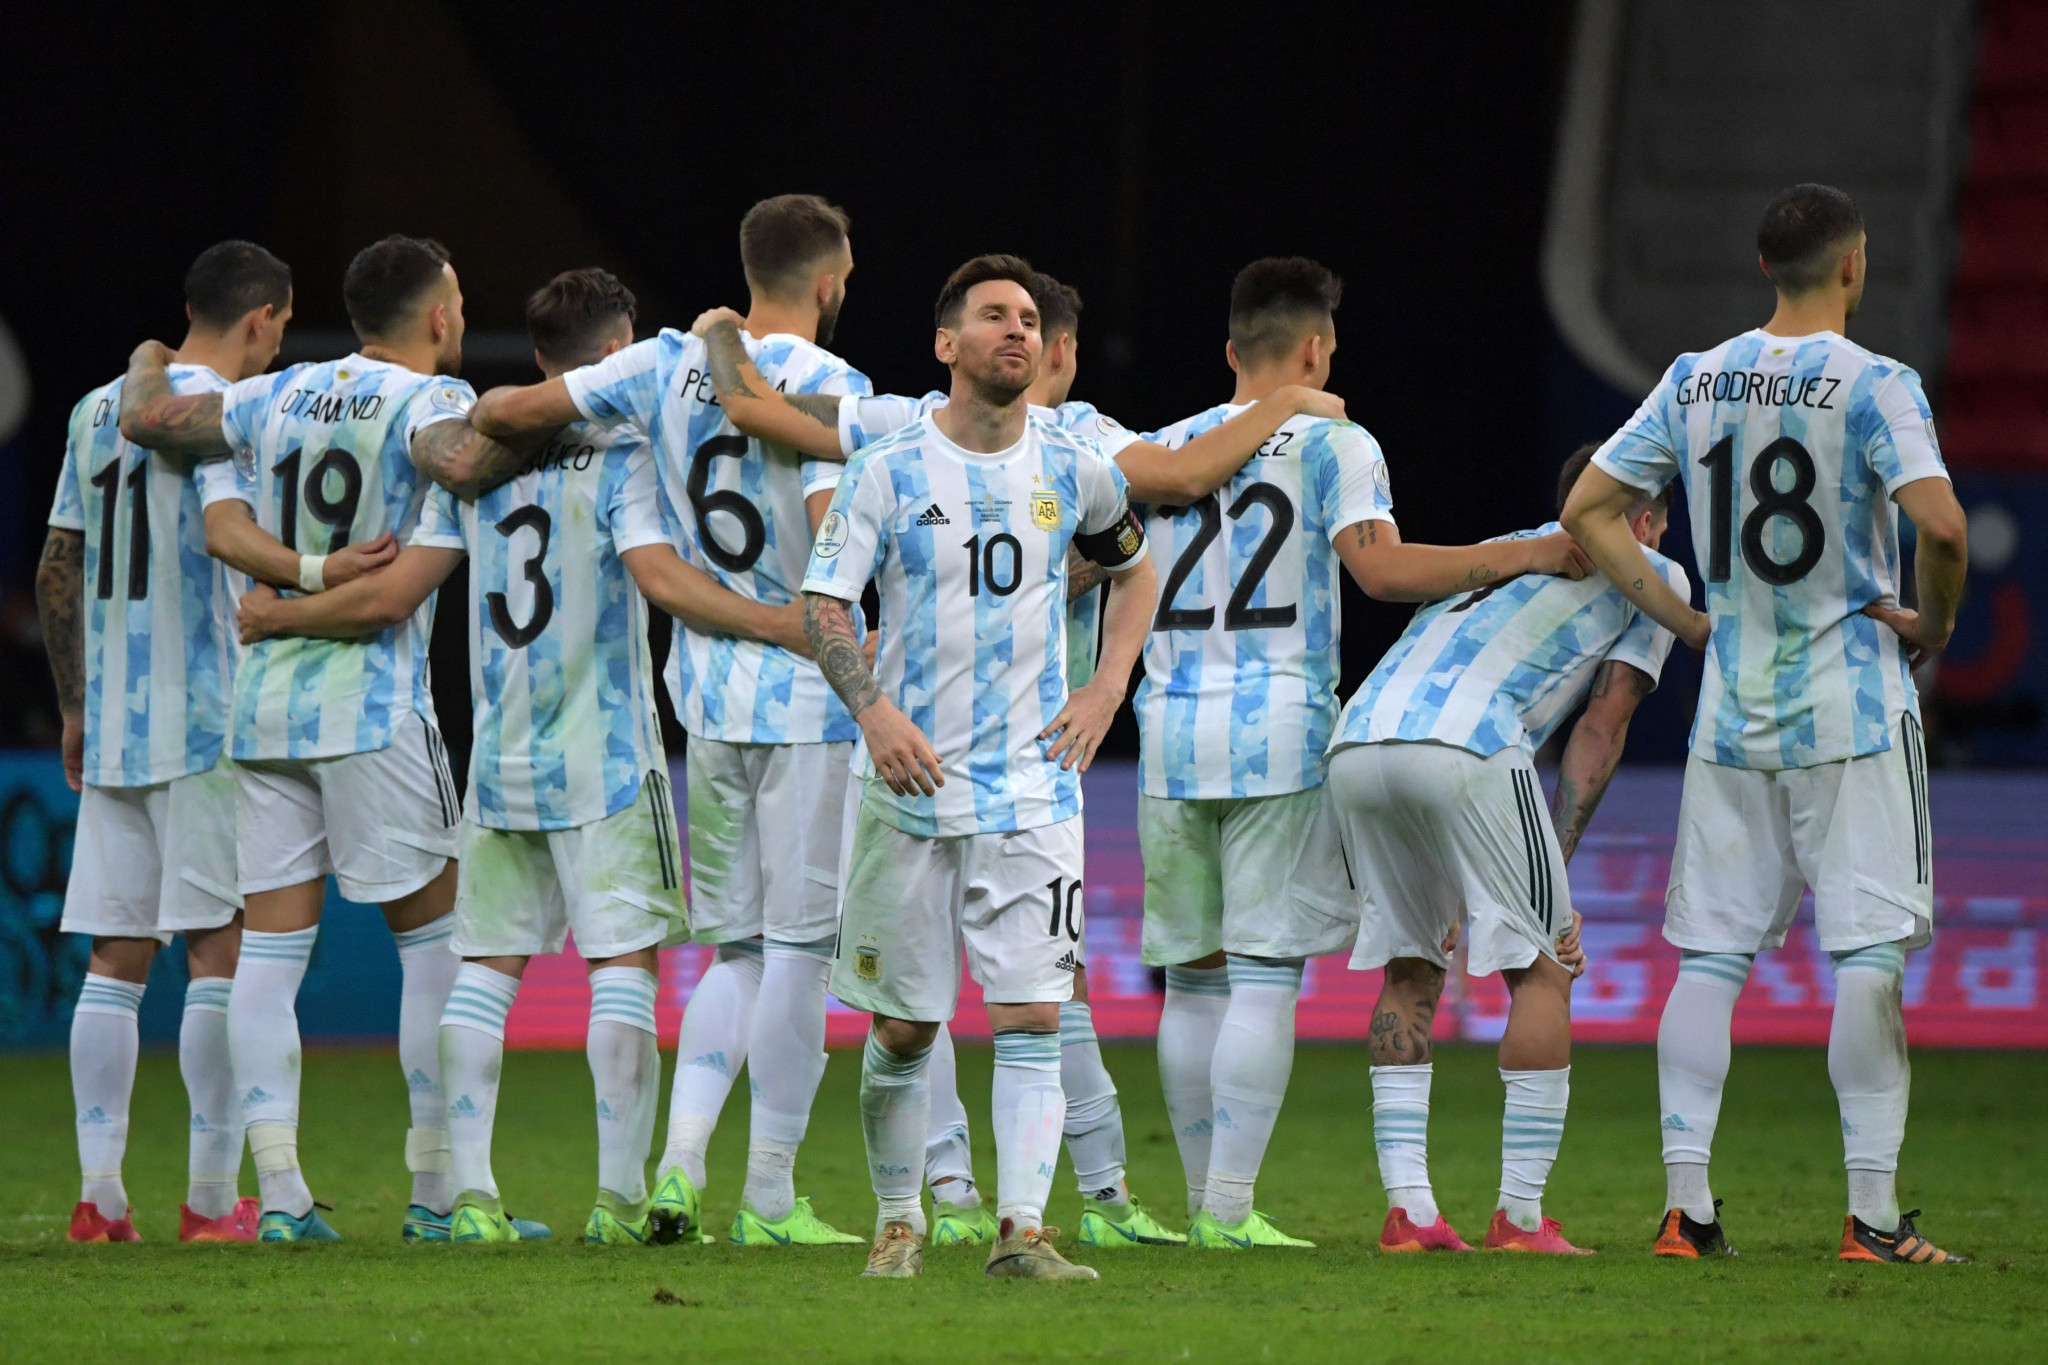 Lionel Messi set up Argentina's goal in normal time and scored in the shoot-out ©Getty Images